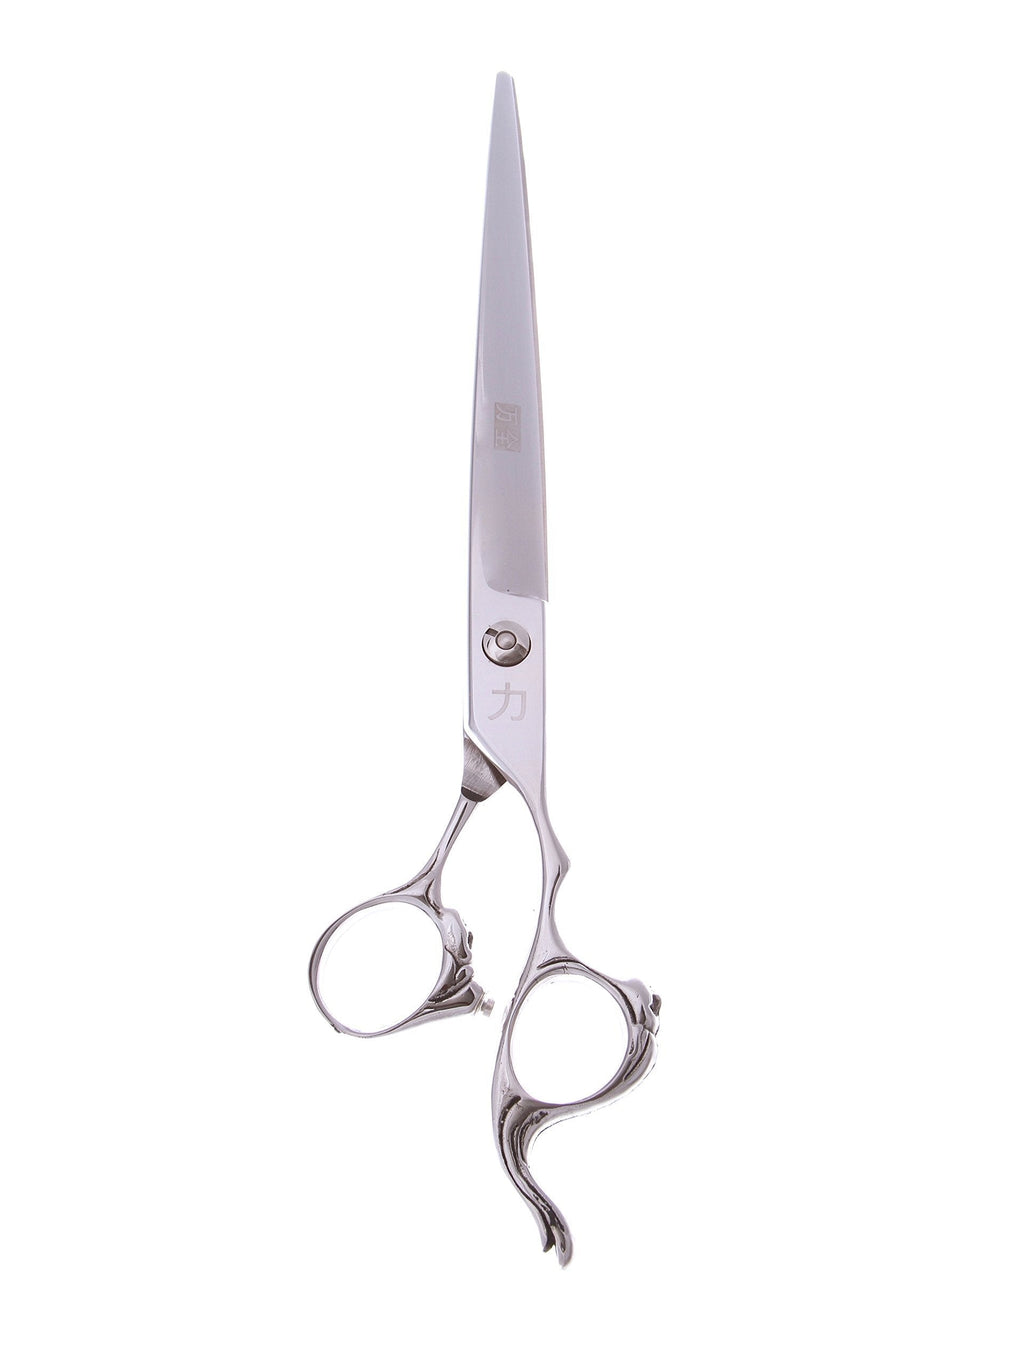 [Australia] - ShearsDirect 440C Stainless Designer Goddess Off Set Handle Cutting Shear with A Flat Tension, 8" 